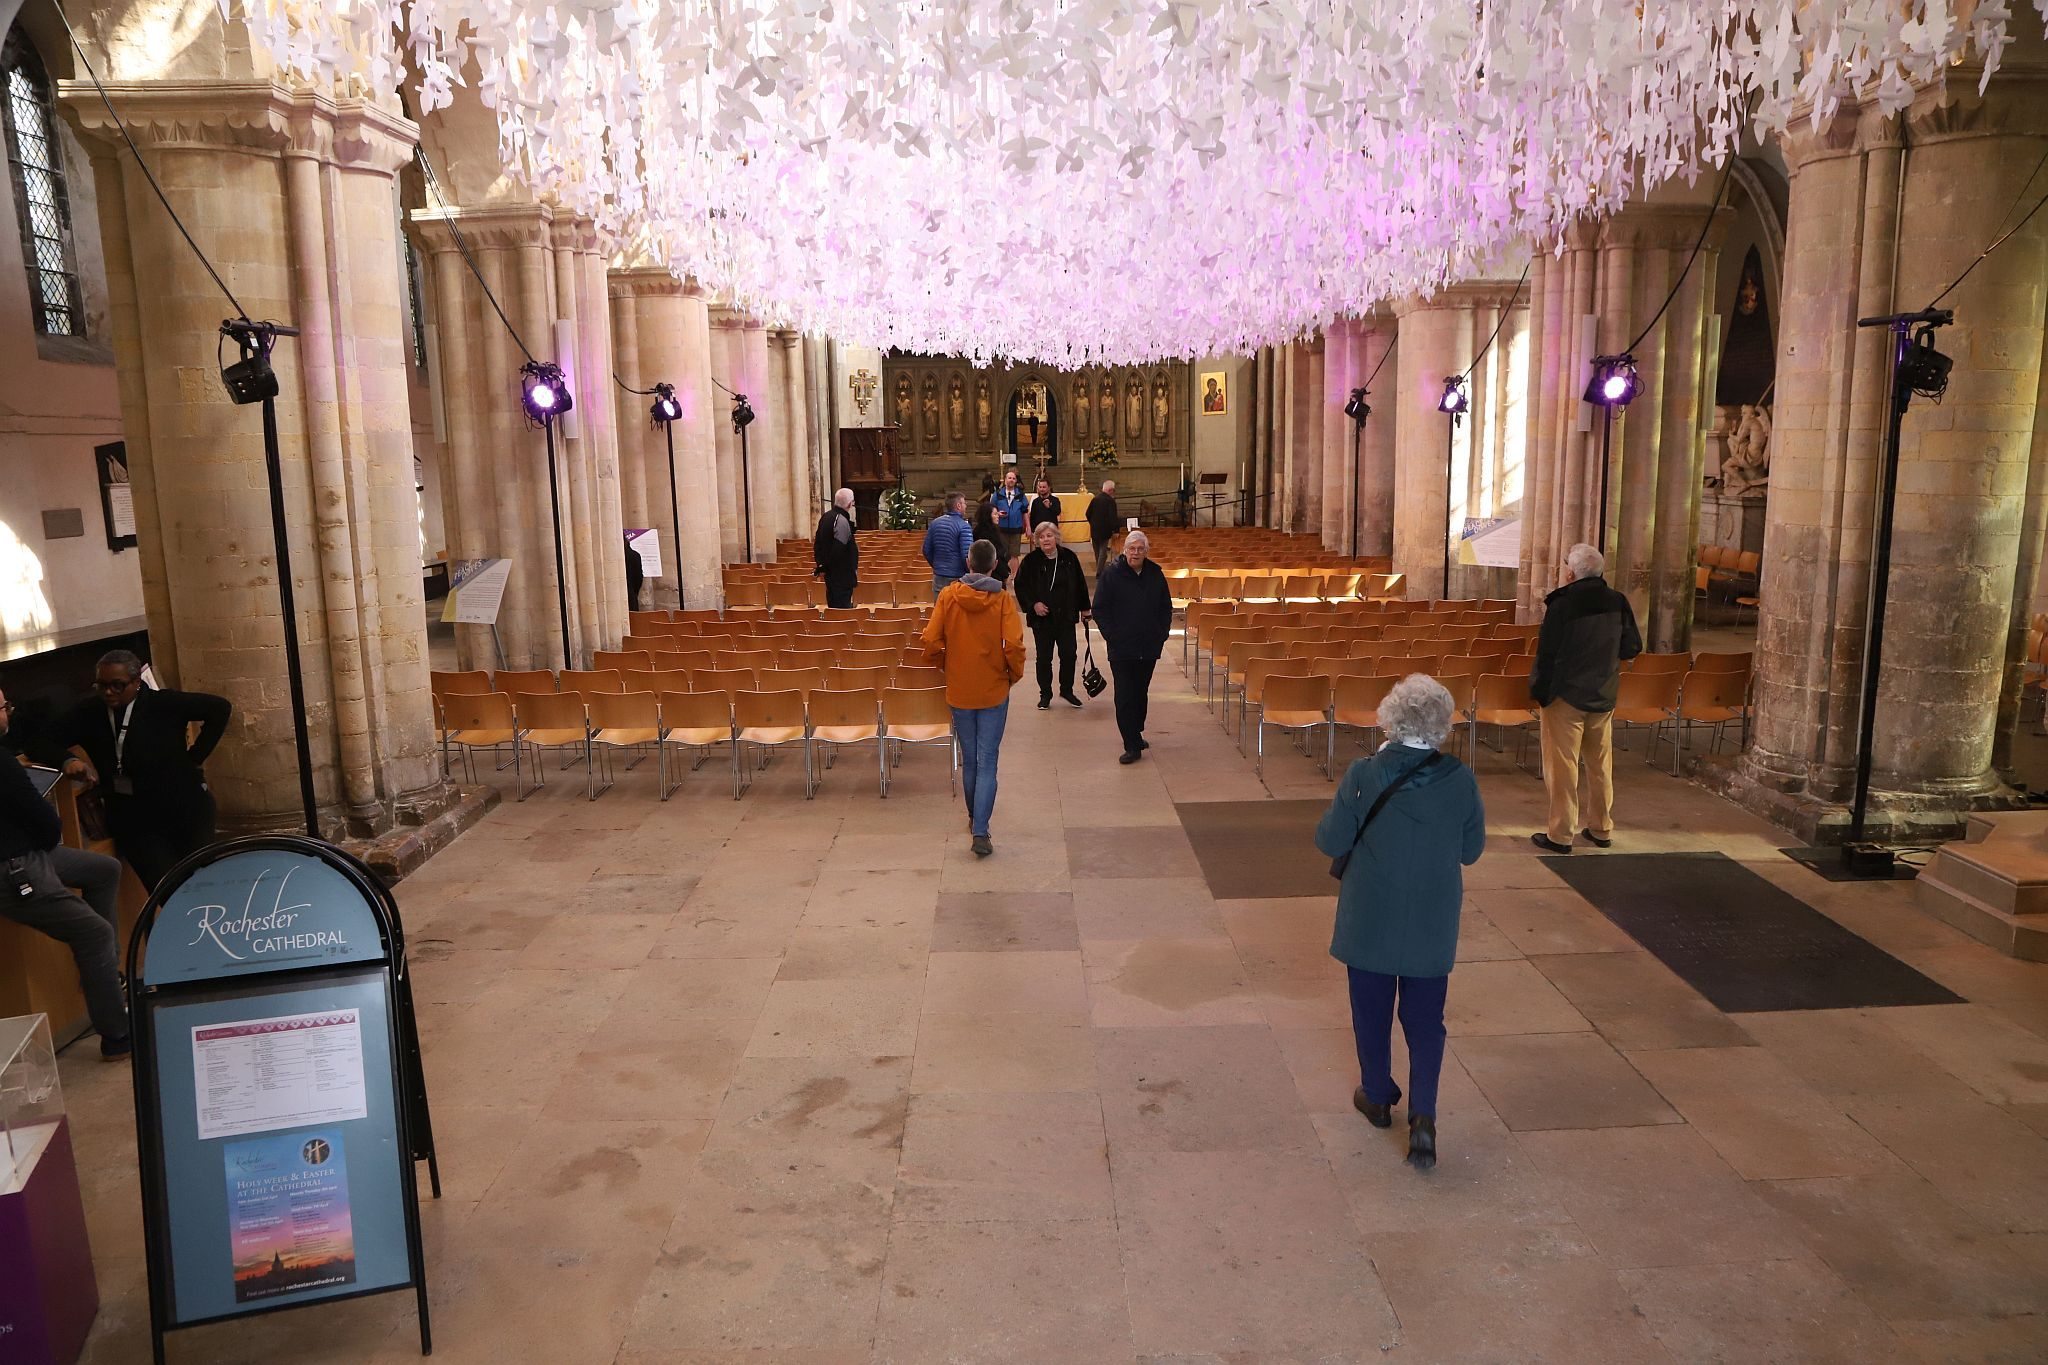 The artwork “Peace Doves” by Peter Walker at Rochester Cathedral in Kent. 11-Feb-2023 until 18-Apr-2023.